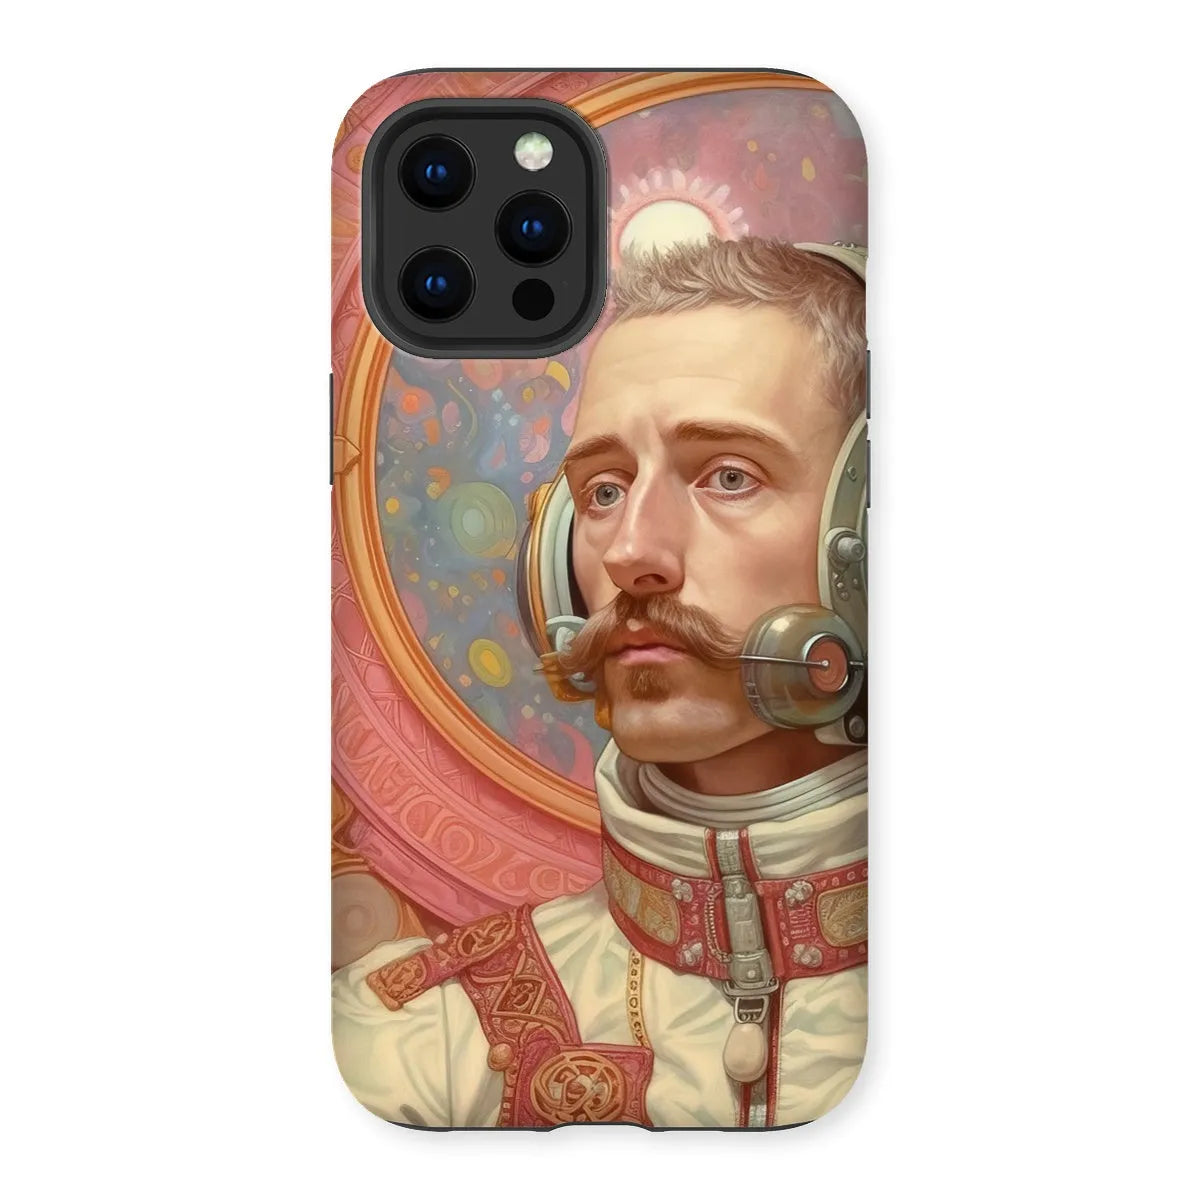 Axel The Gay Astronaut - Gay Aesthetic Art Phone Case - Iphone 12 Pro Max / Matte - Mobile Phone Cases - Aesthetic Art